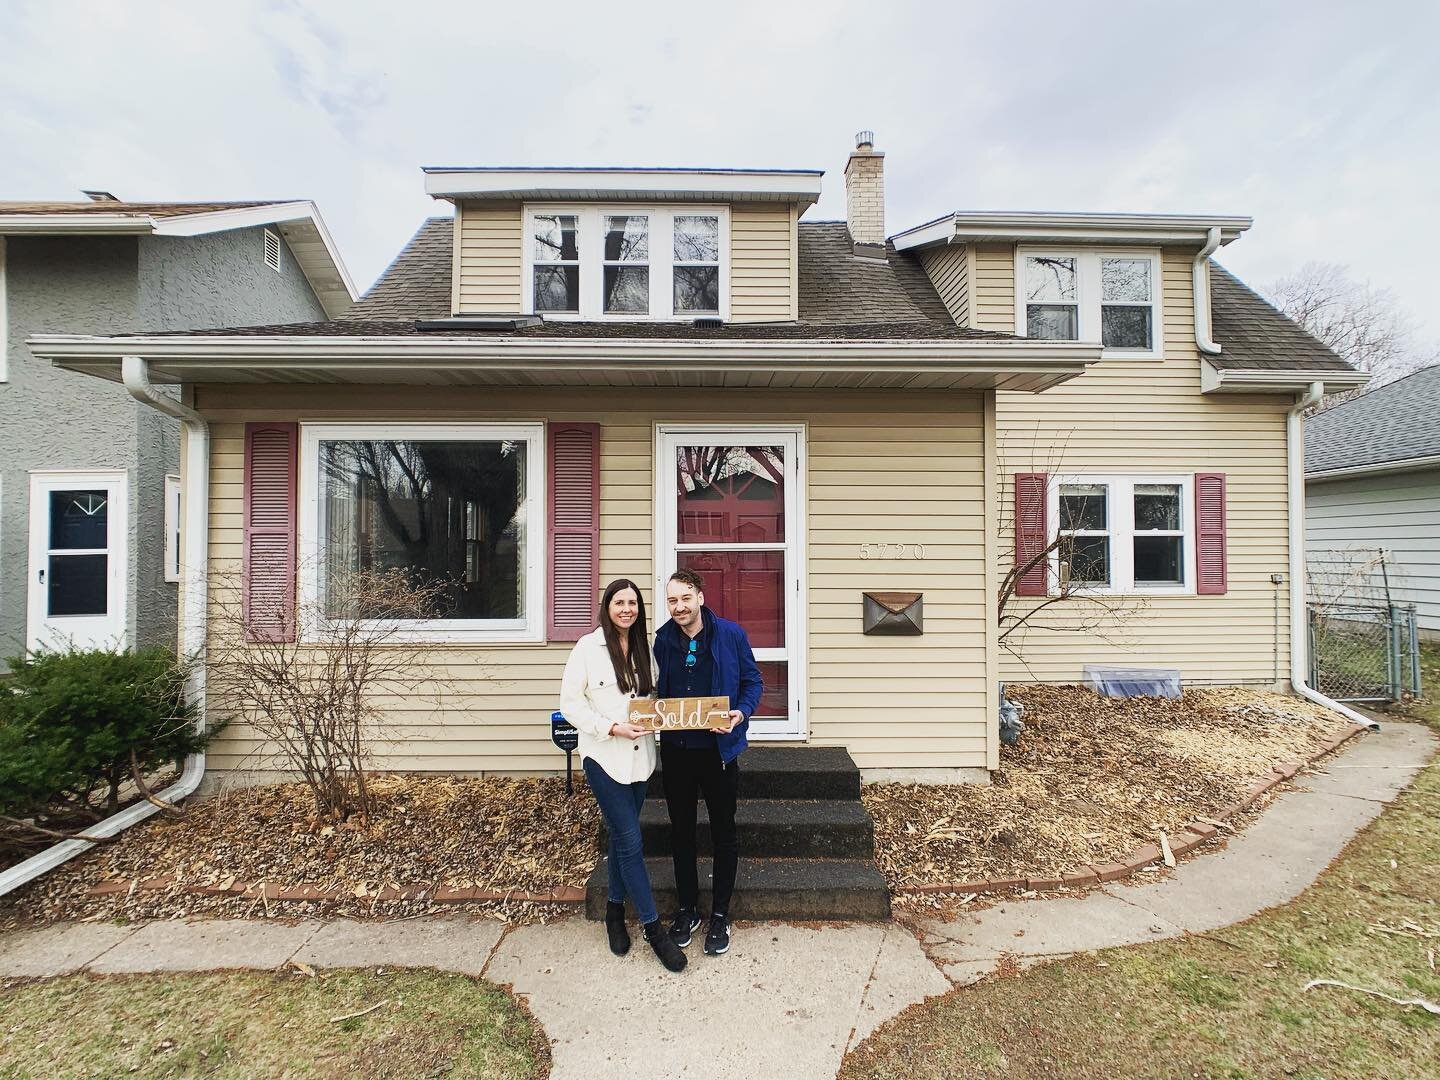 SOLD! 

Can&rsquo;t wait to make this house into a home with @michelle_mathison__ 

Big thanks to @twincities.realtor for his transparency and for making this process as smooth as possible for us! Highly recommend.